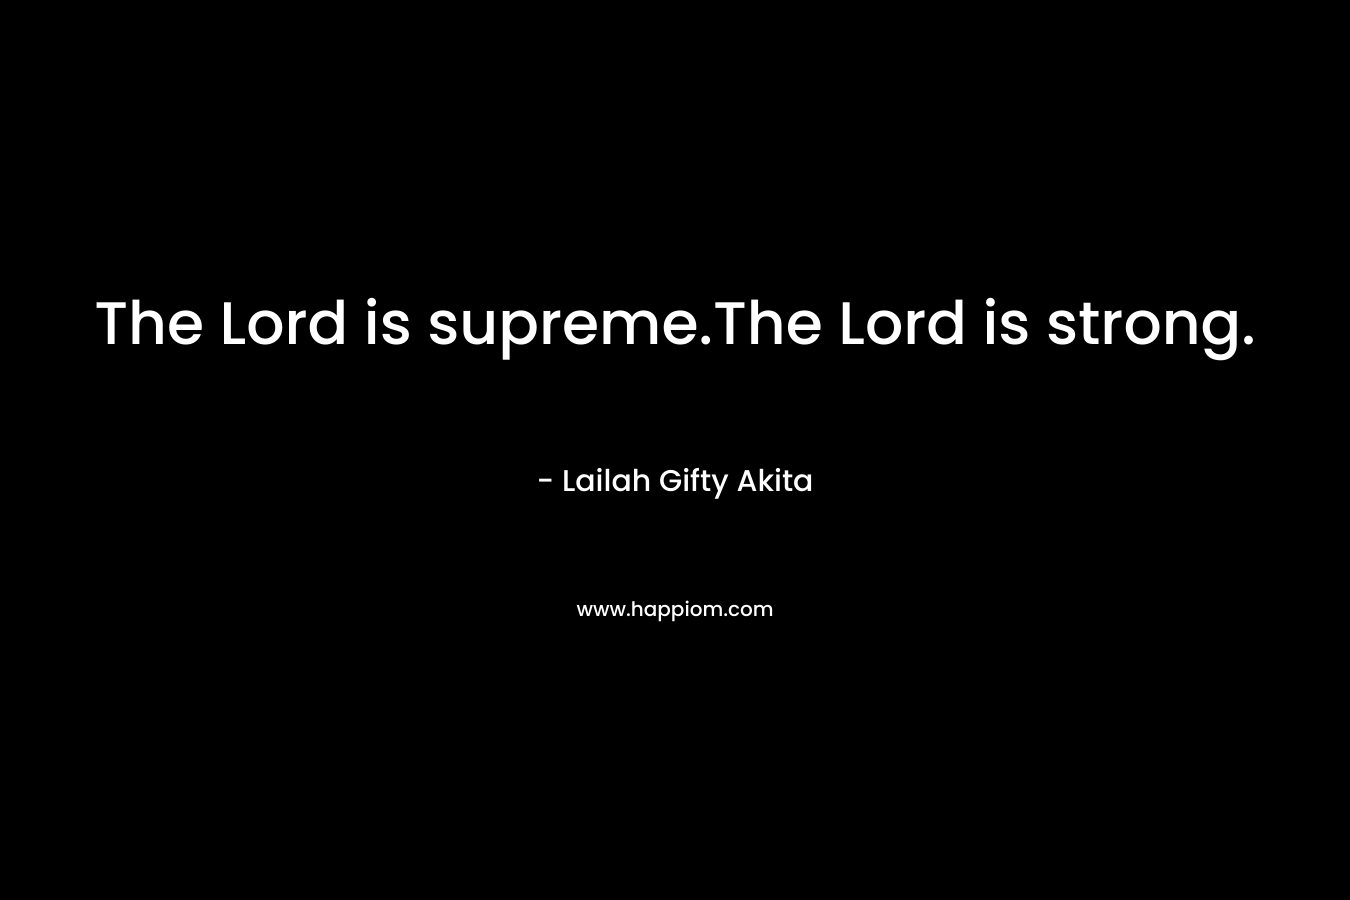 The Lord is supreme.The Lord is strong.